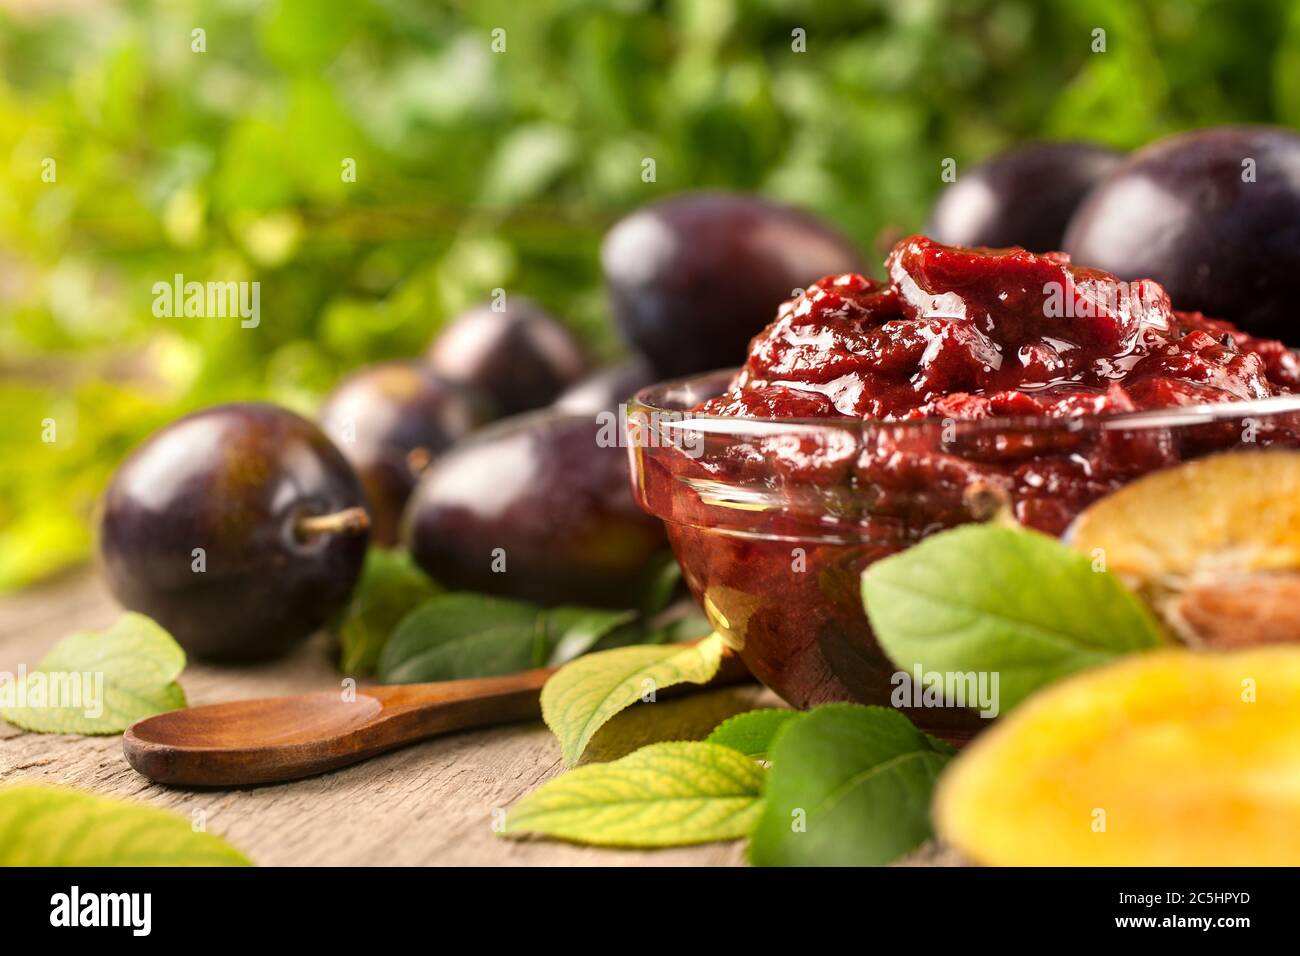 Jam of healthy organically grown plums with plum fruits on wooden table background. Close up, side view, high-resolution product image. Stock Photo